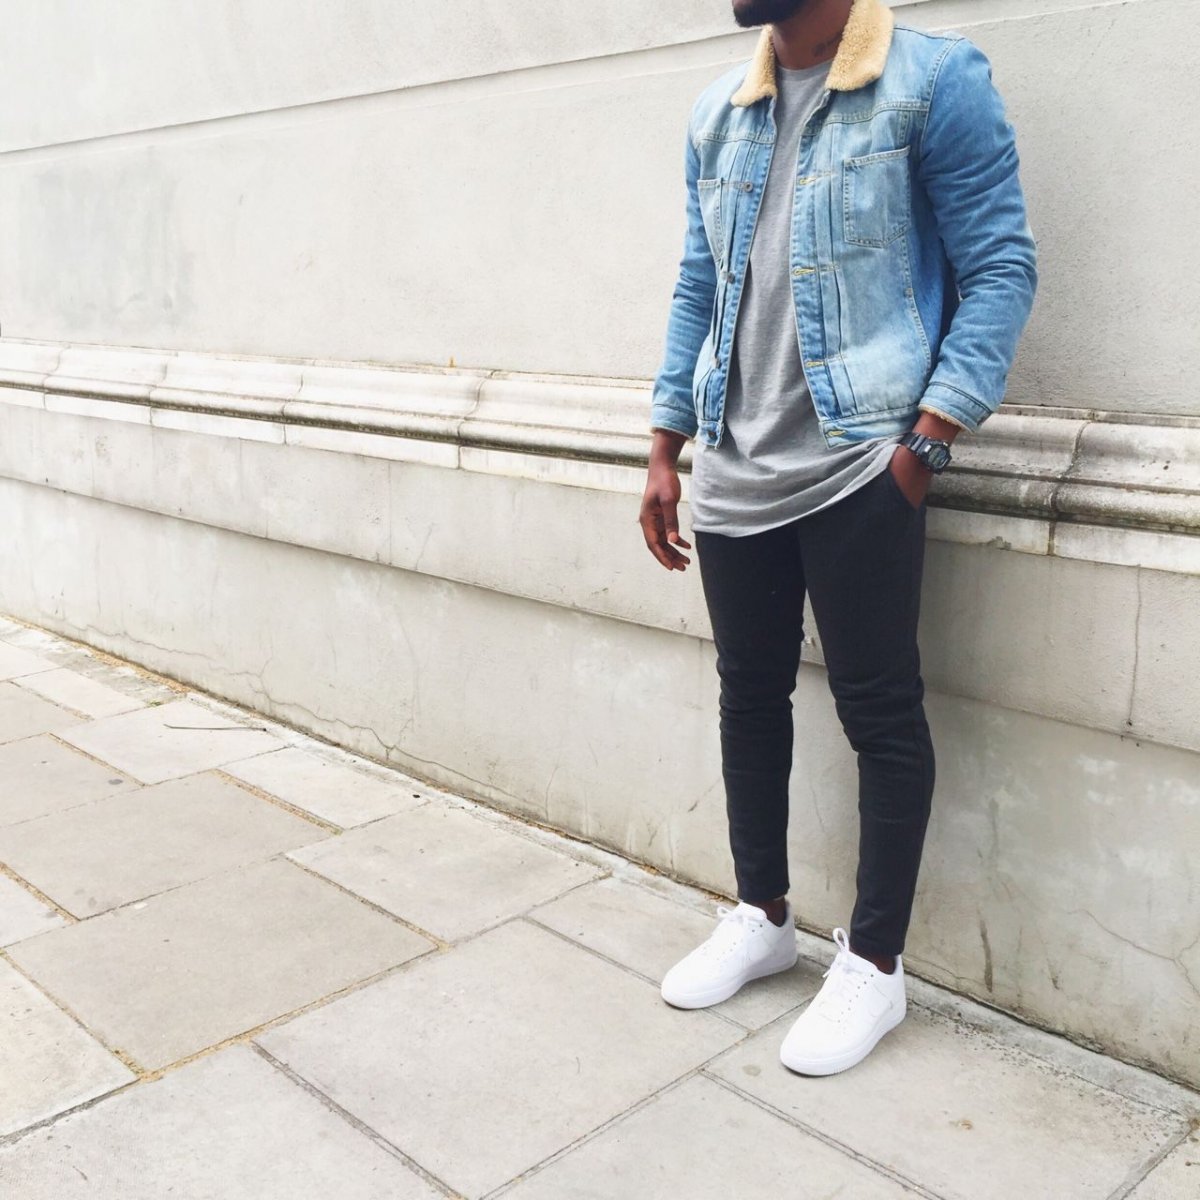 Adidas Superstar outfit